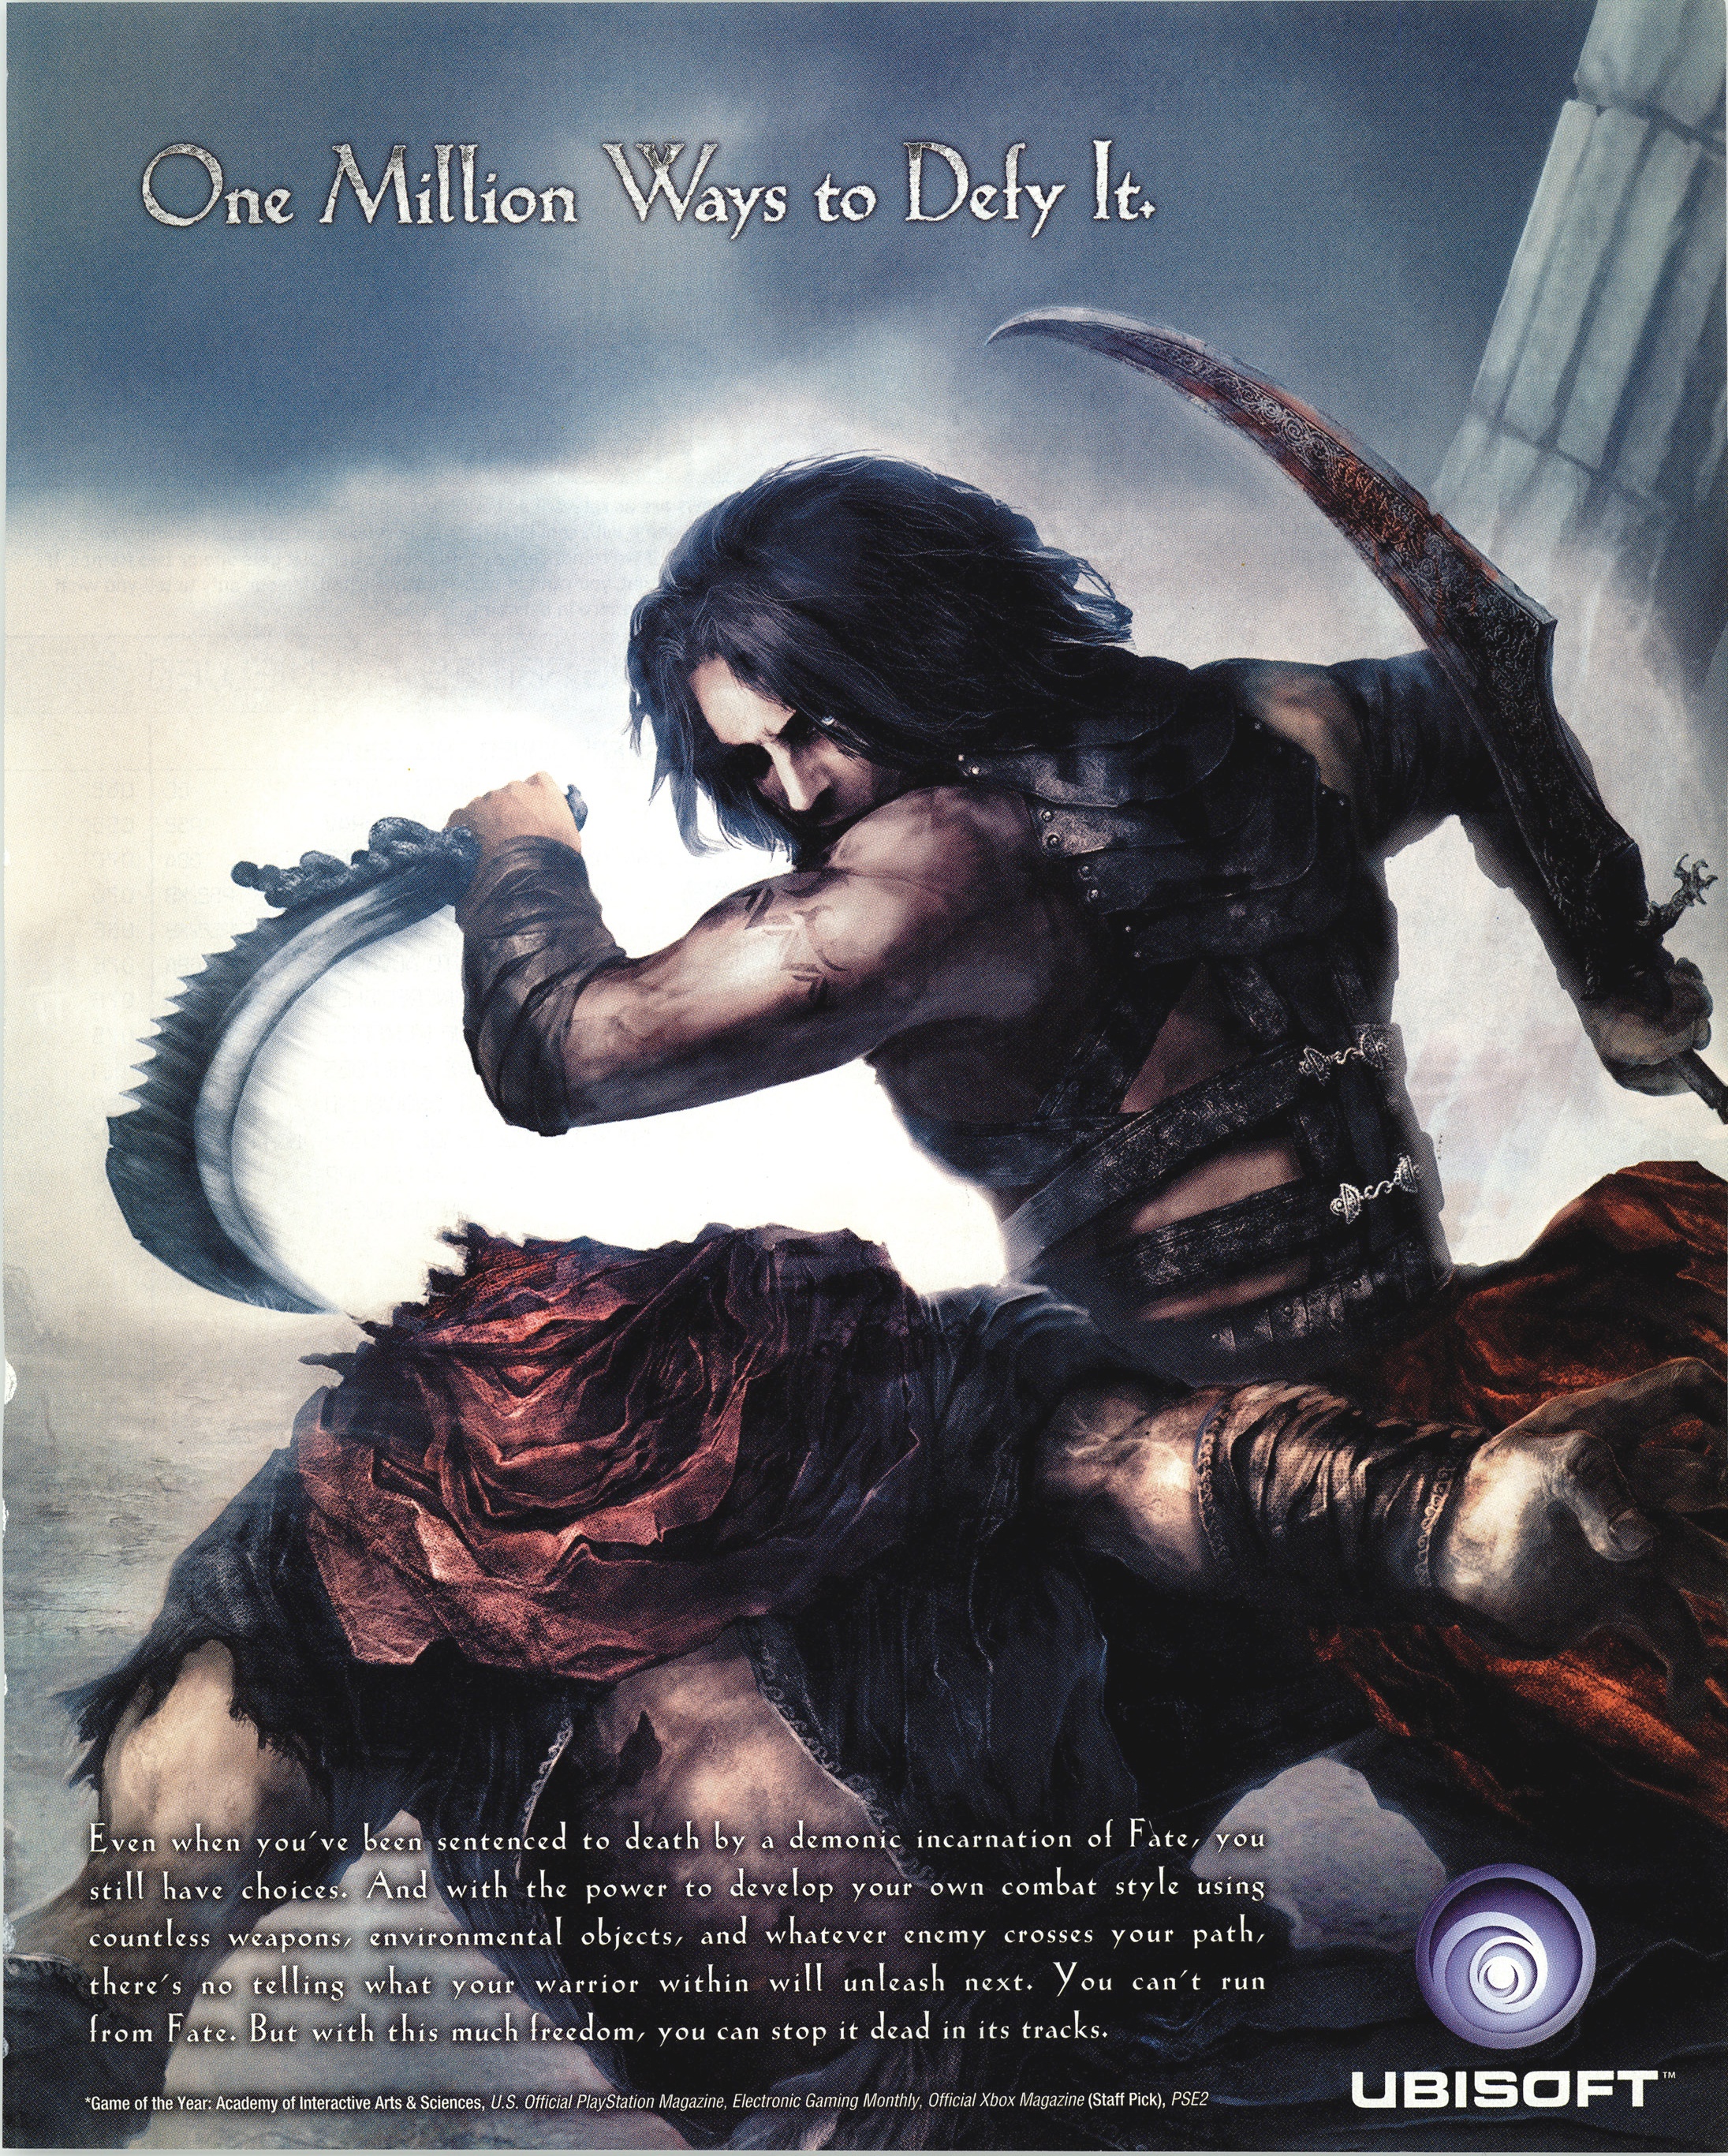 Prince Of Persia: Warrior Within (GC) - The Cover Project